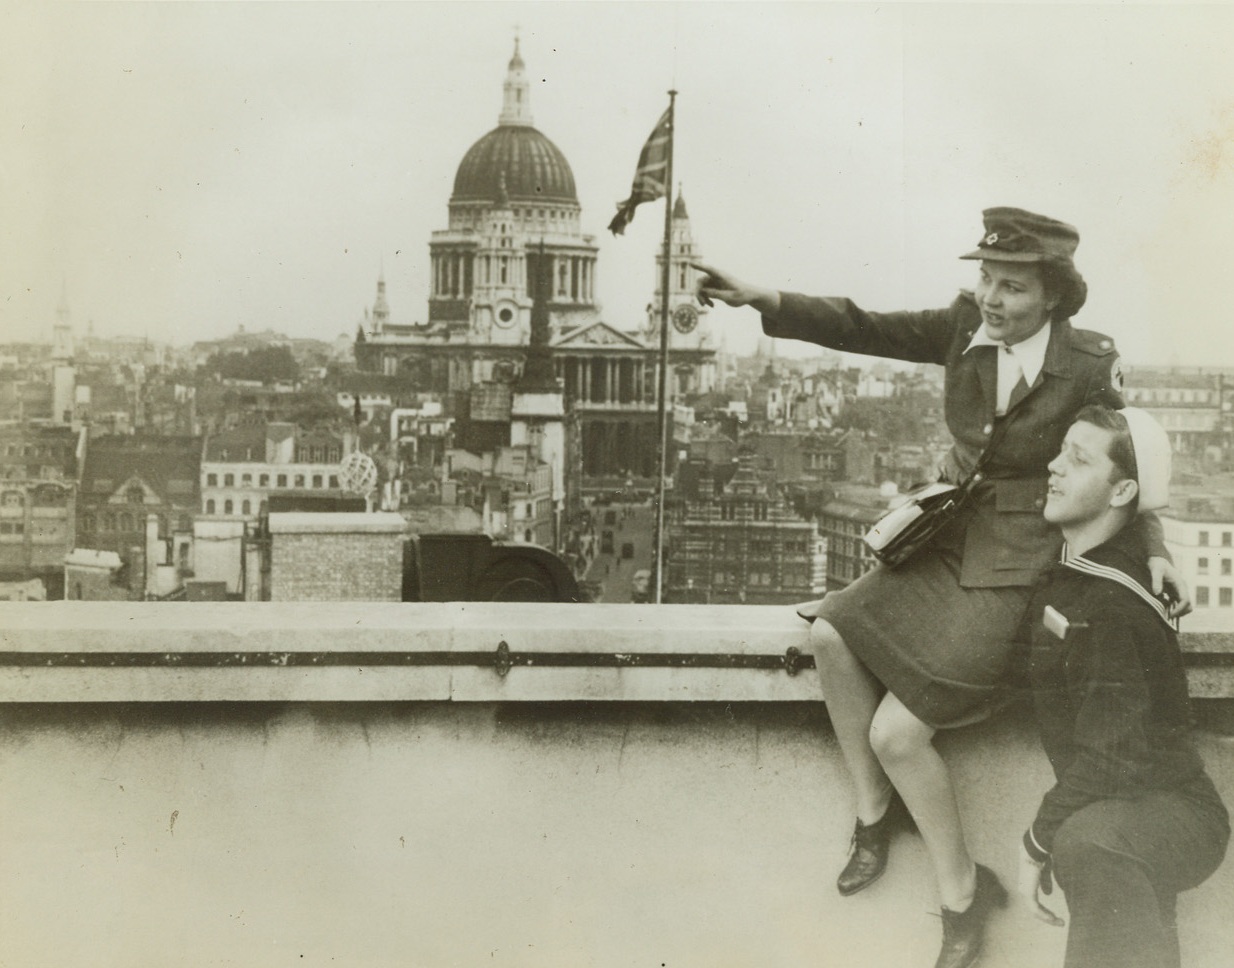 A Roof with a View, 10/2/1942. London – Whatever the American Red Cross worker is pointing out to the American sailor, it leaves him open-mouthed with interest, as they view London from the roof of the Daily Telegraph building on famed Fleet Street. St. Paul’s Cathedral is seen in the distance. Credit: ACME;